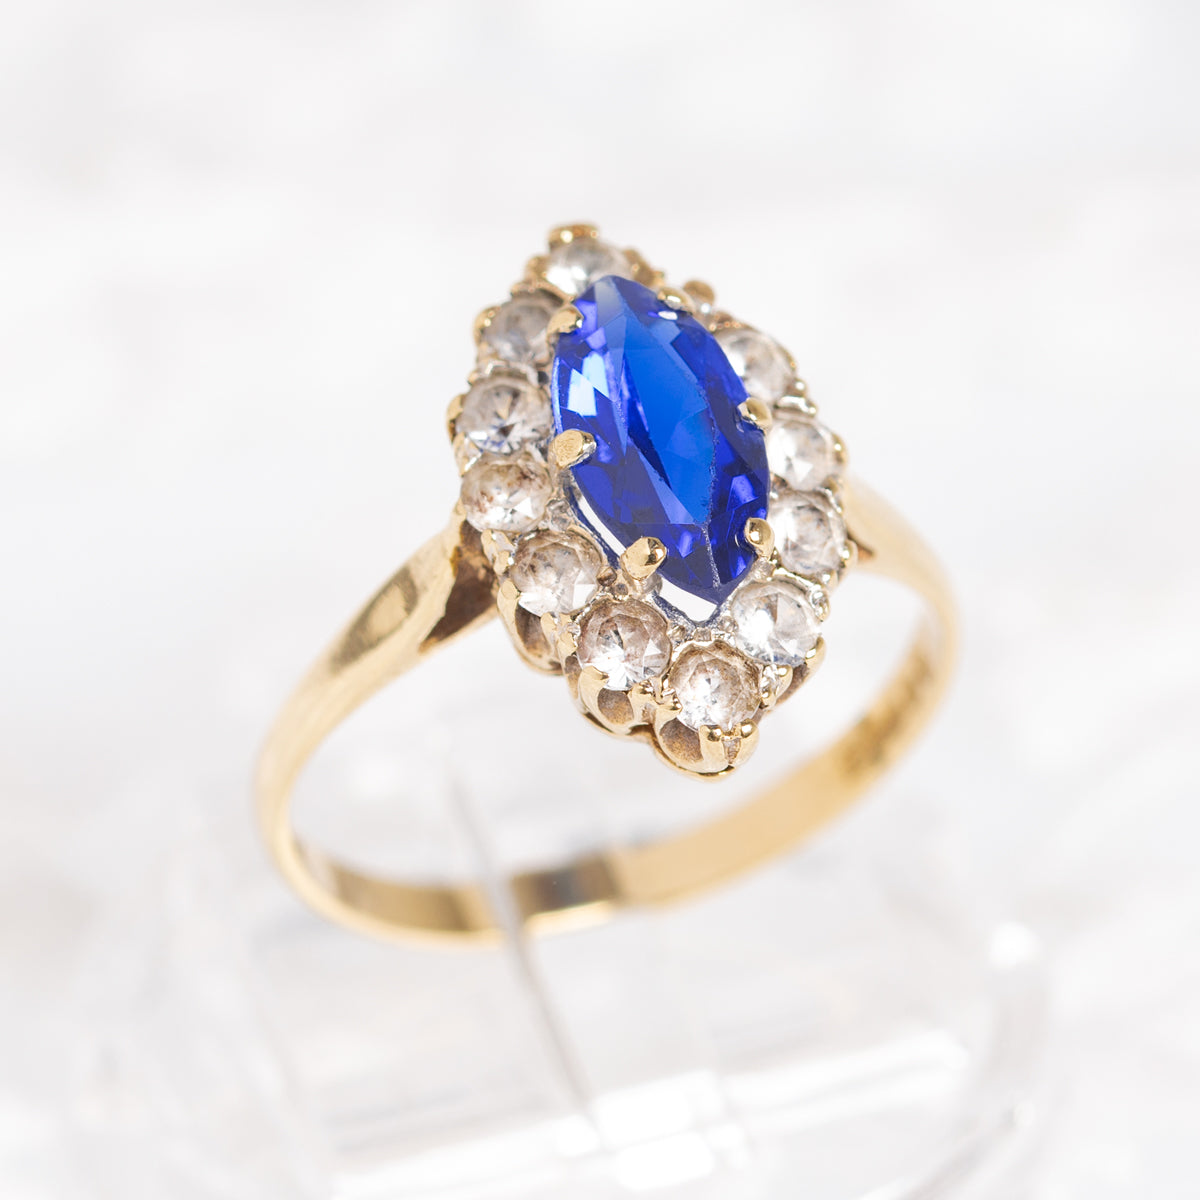 9ct Gold Marquise Gemstone Ring With Royal Blue Spinel & Clear Gem Halo Vintage (A1381)